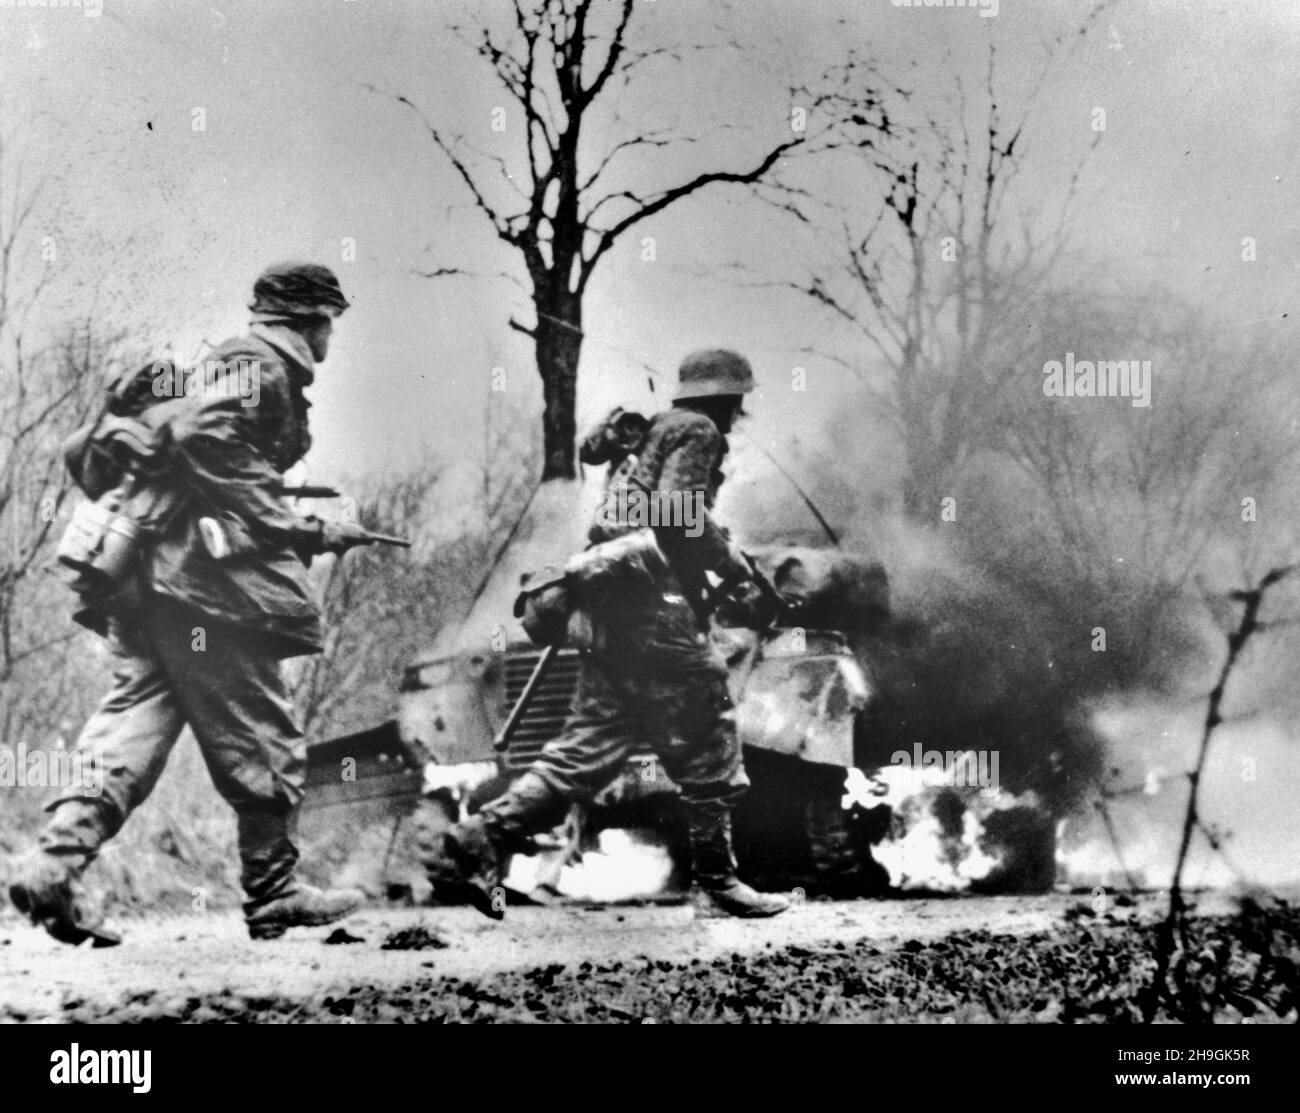 POTEAU, BELGIUM - 18 December 1944 - This image captured from the Nazis shows the Nazi Panzergrenadier-SS Kampfgruppe Hansen soldiers in action during Stock Photo